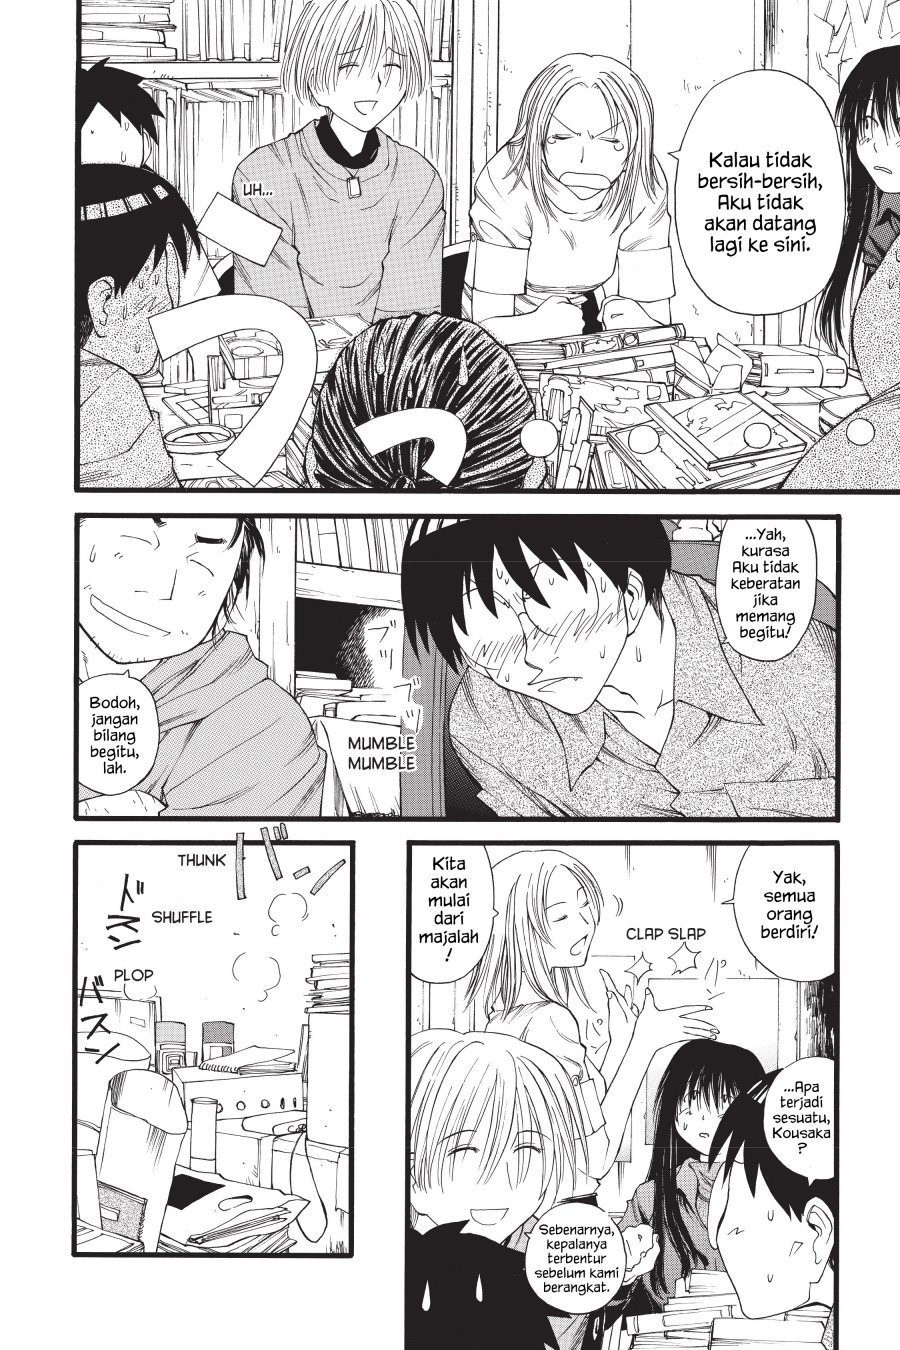 Genshiken – The Society for the Study of Modern Visual Culture Chapter 18 Image 11